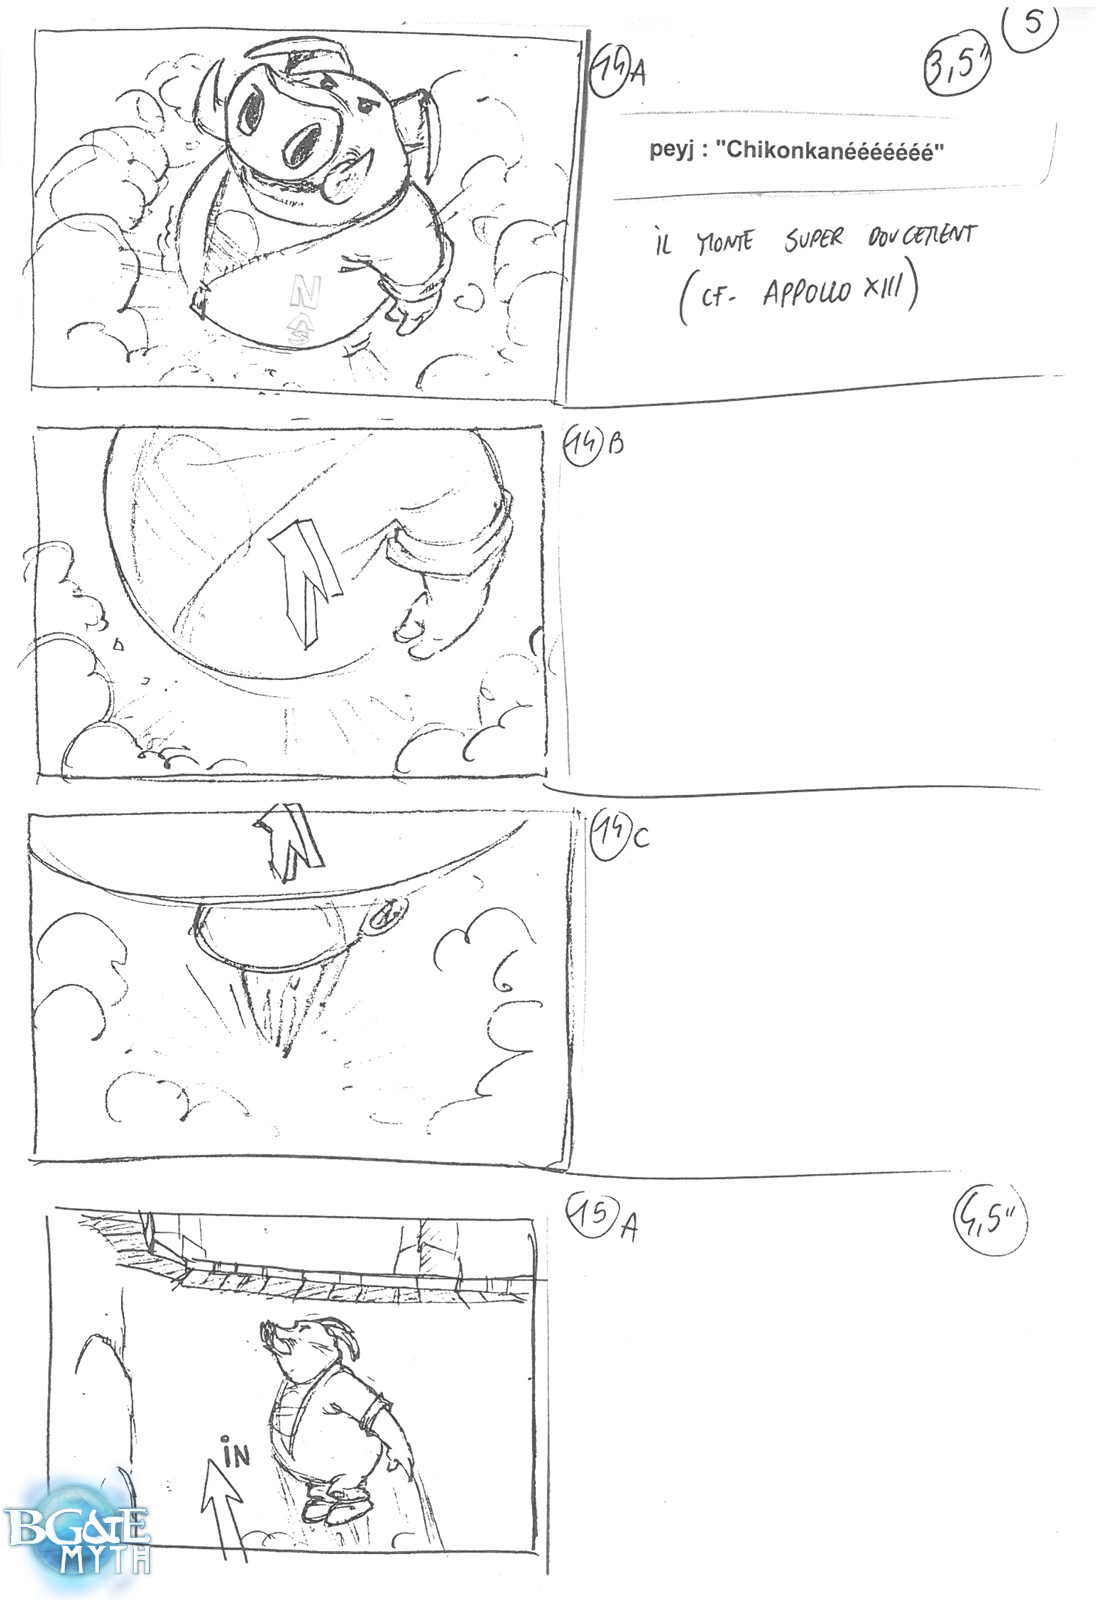 [Storyboard] Les Jet-boots - Page 5